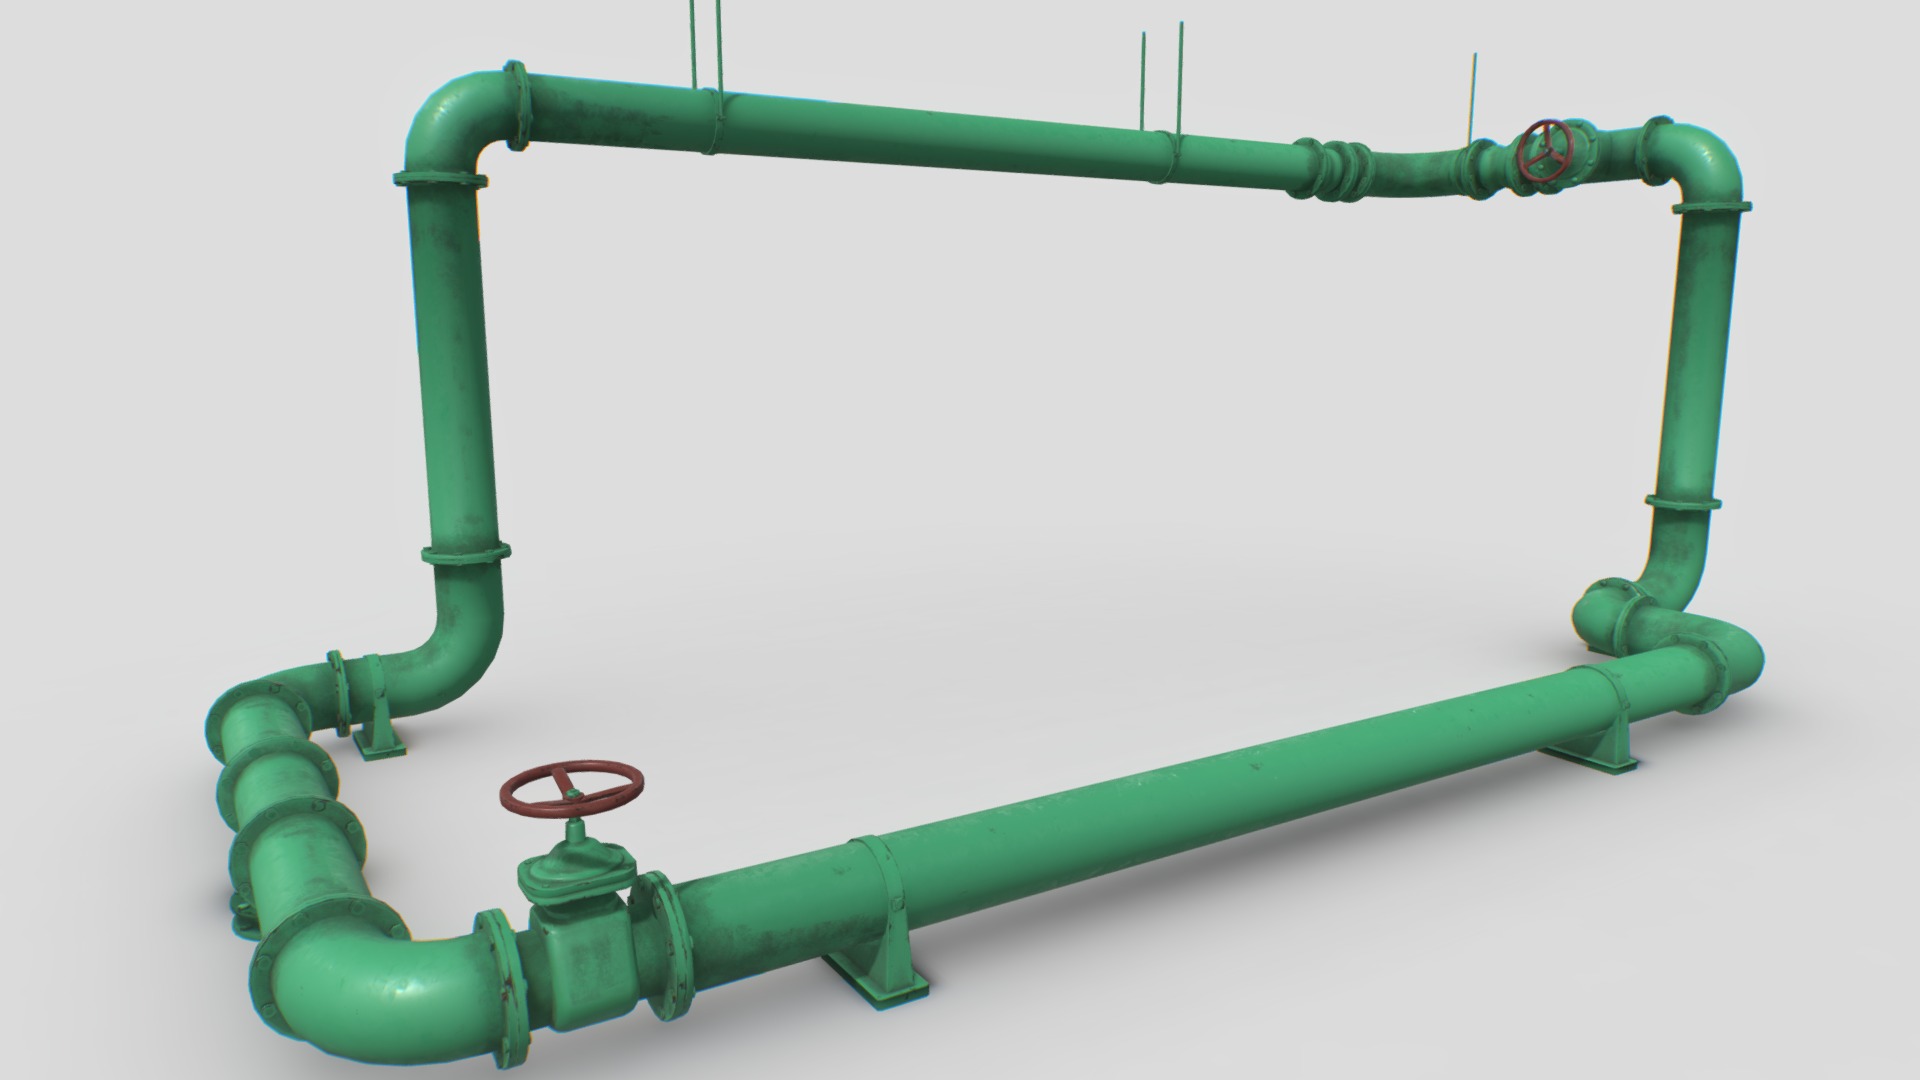 3D model Modular pipes pack 3 - This is a 3D model of the Modular pipes pack 3. The 3D model is about a green and white toy.